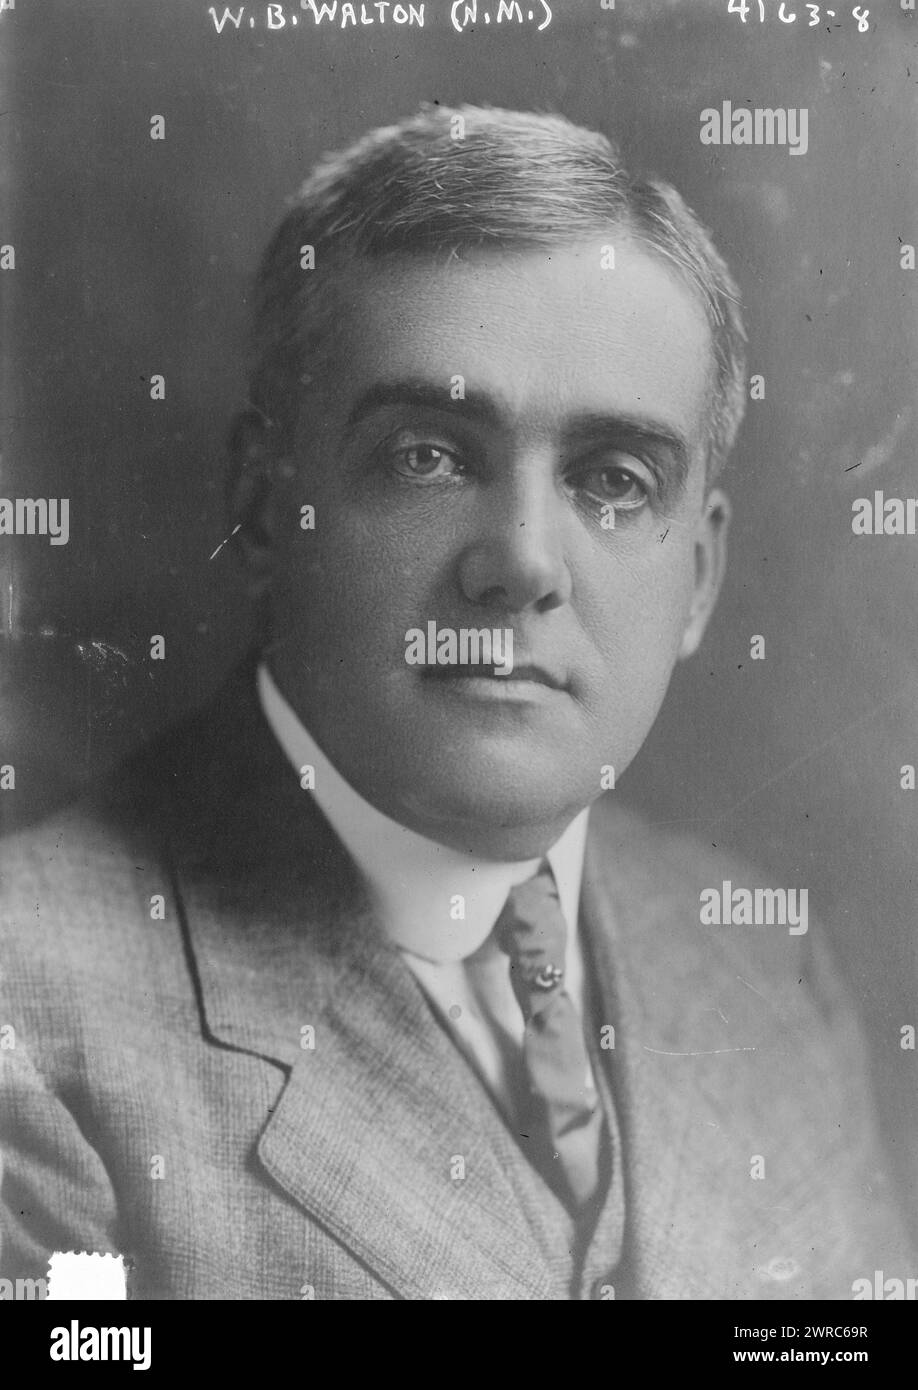 W.B. Walton (N.M.), Photograph shows lawyer and politician William Bell Walton (1871-1939) who served as a U.S. Representative from New Mexico from 1917 to 1919., between ca. 1915 and ca. 1920, Glass negatives, 1 negative: glass Stock Photo